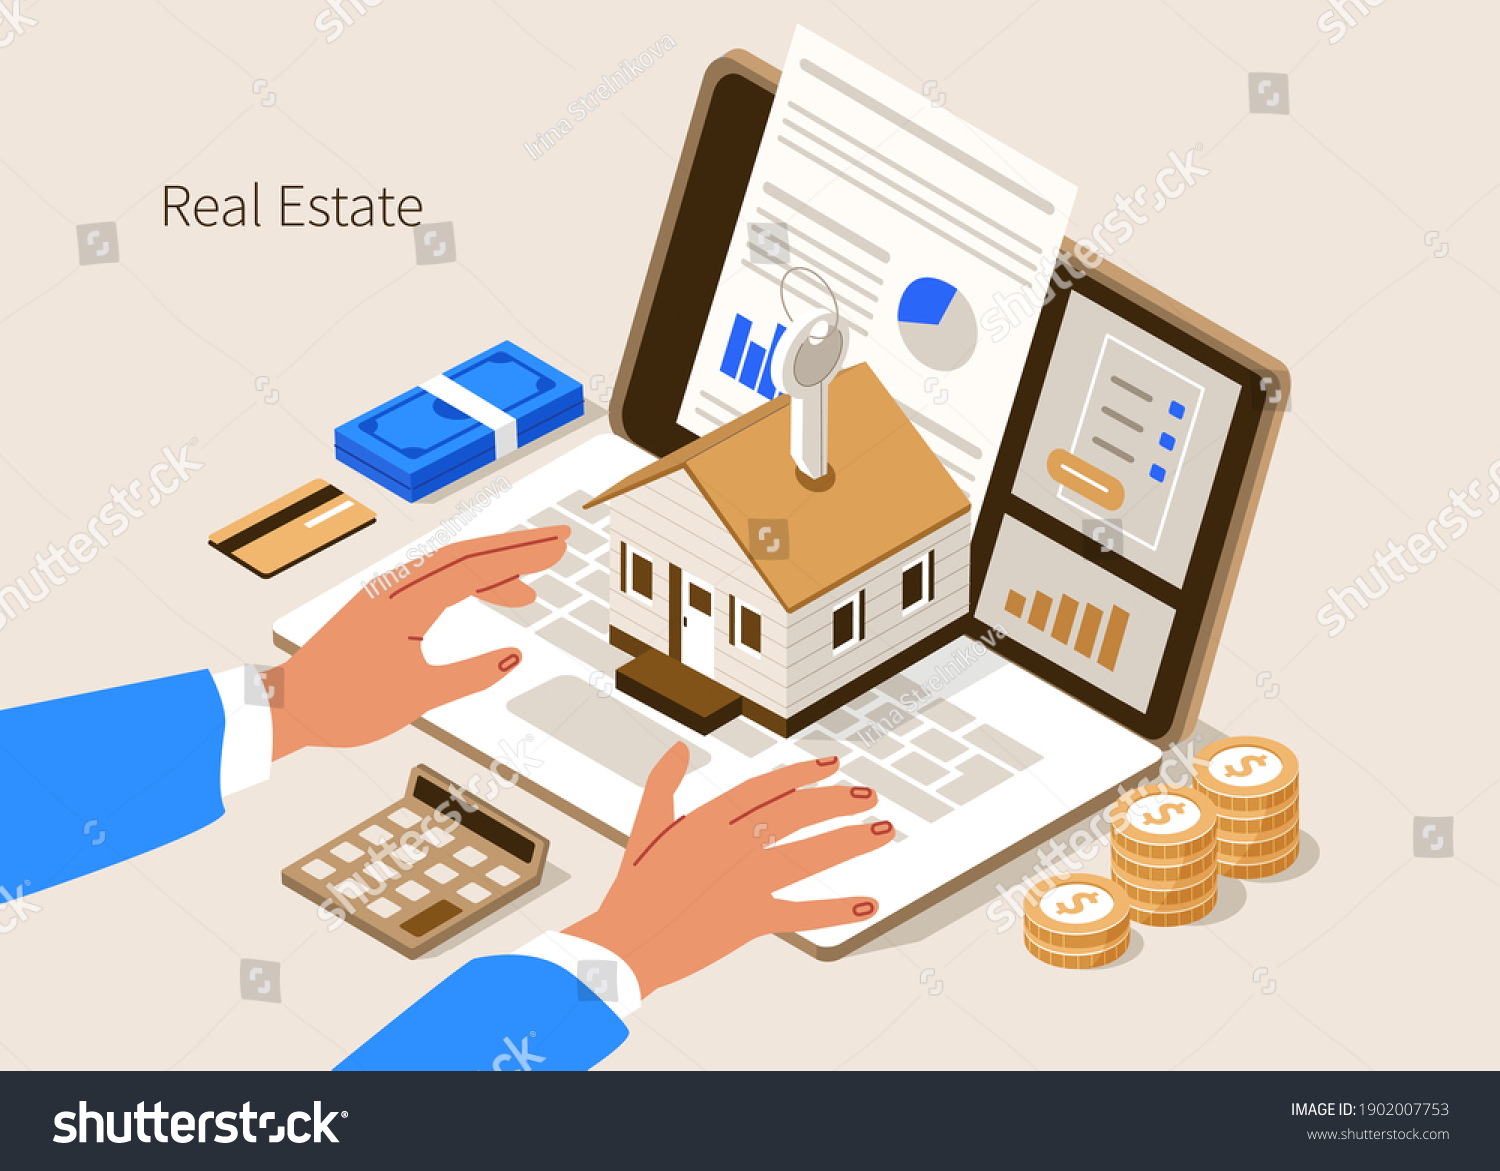 Character Buying new Home with Mortgage Approval Documents on Screen. People Invest Money in Real Estate Property. House Loan, Rent and Mortgage Concept. Flat Isometric Vector Illustration. #1902007753